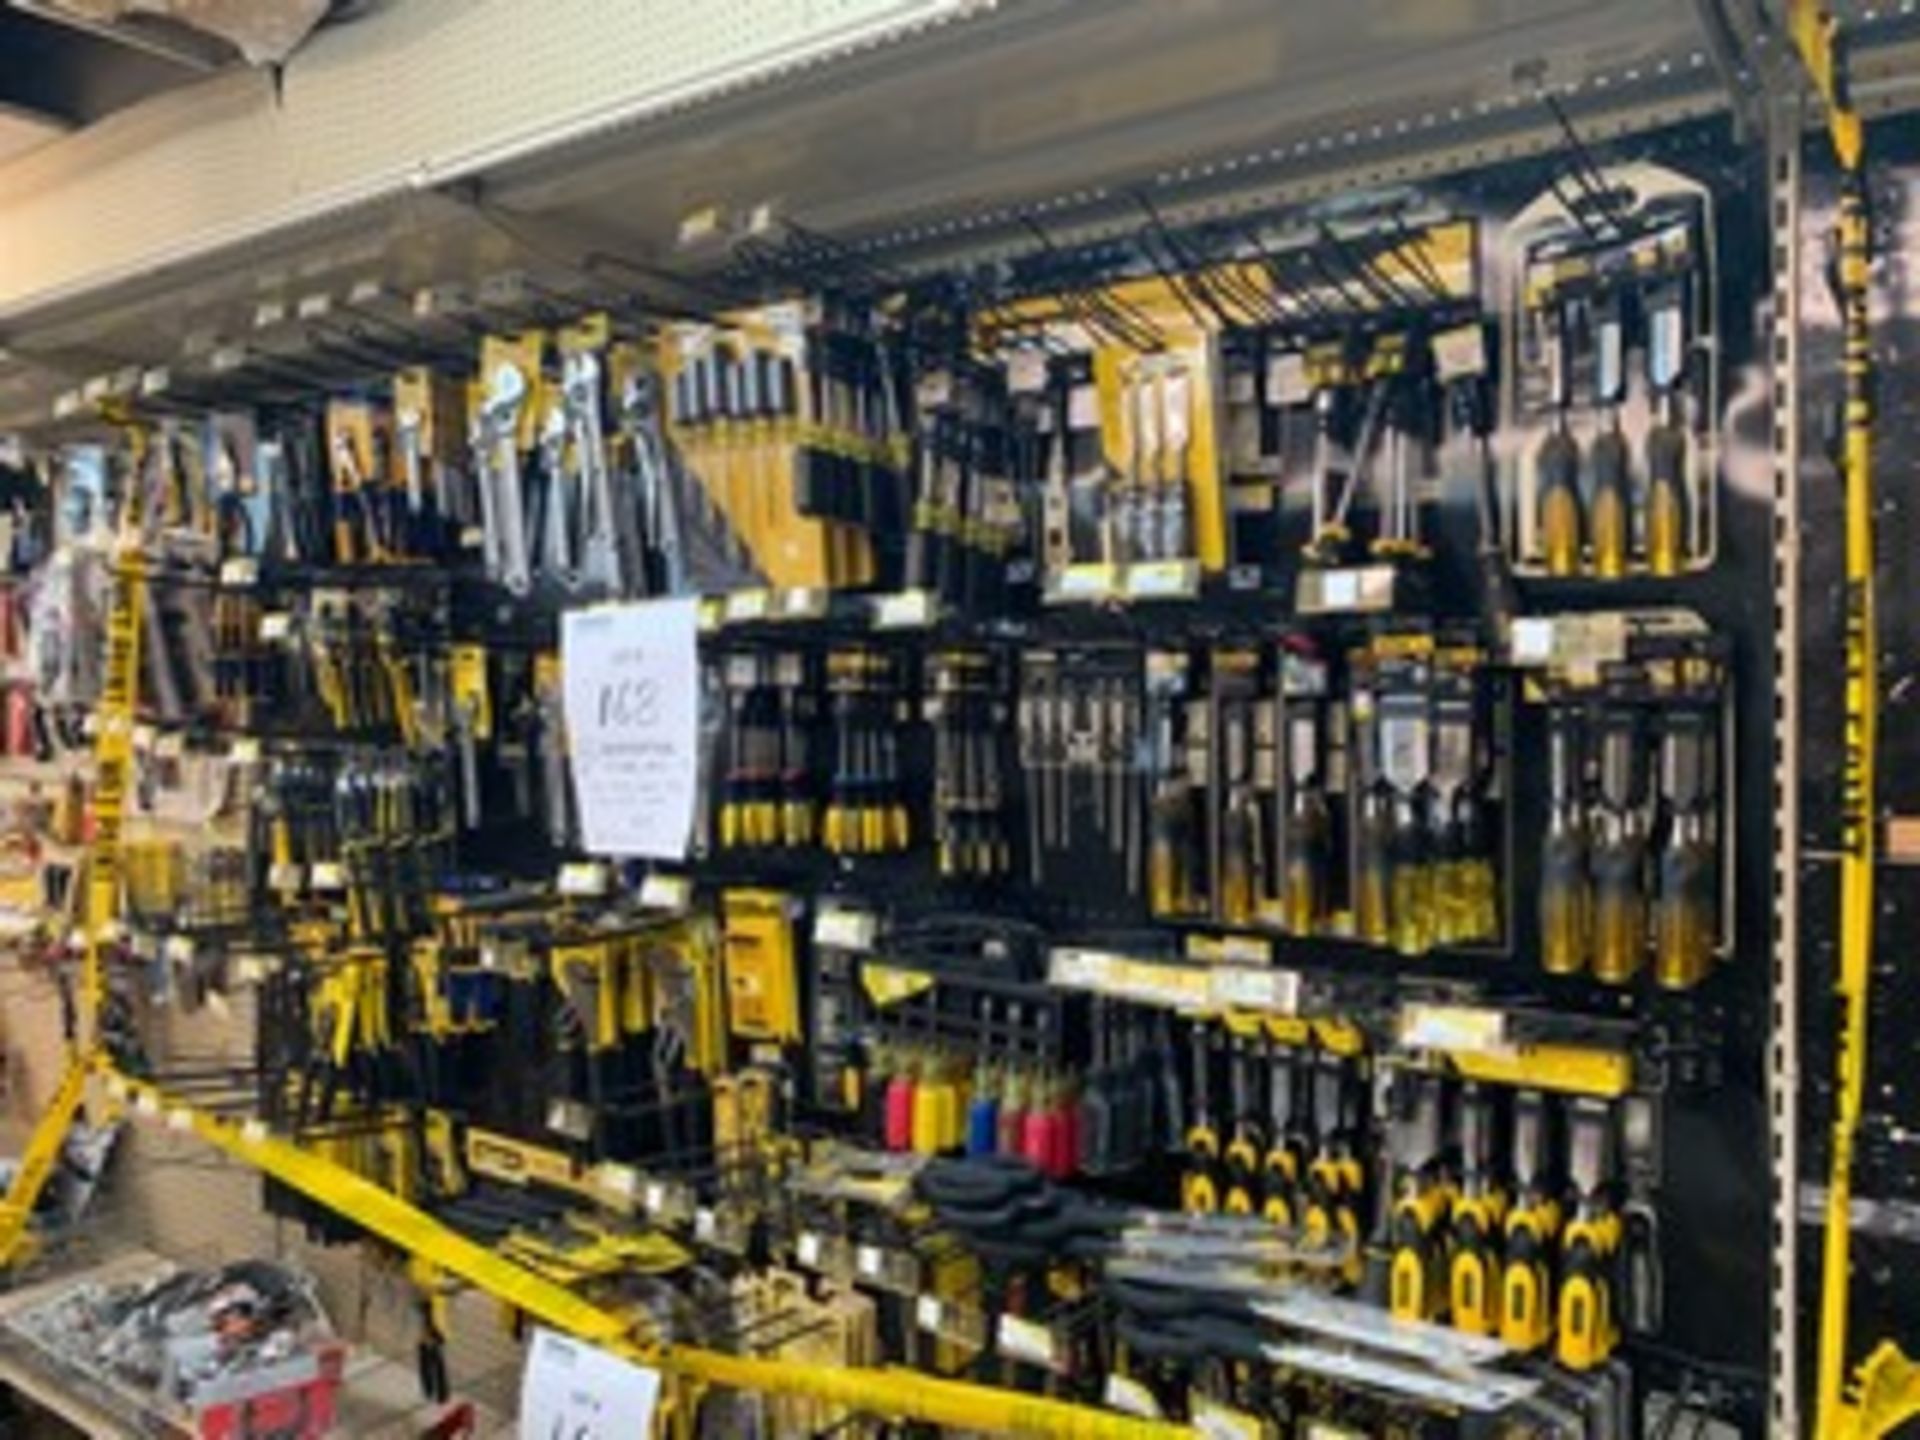 ASSORTED SCREW DRIVERS, CHISELS, VICE GRIPS, ETC - STANLEY, IRWIN, ETC